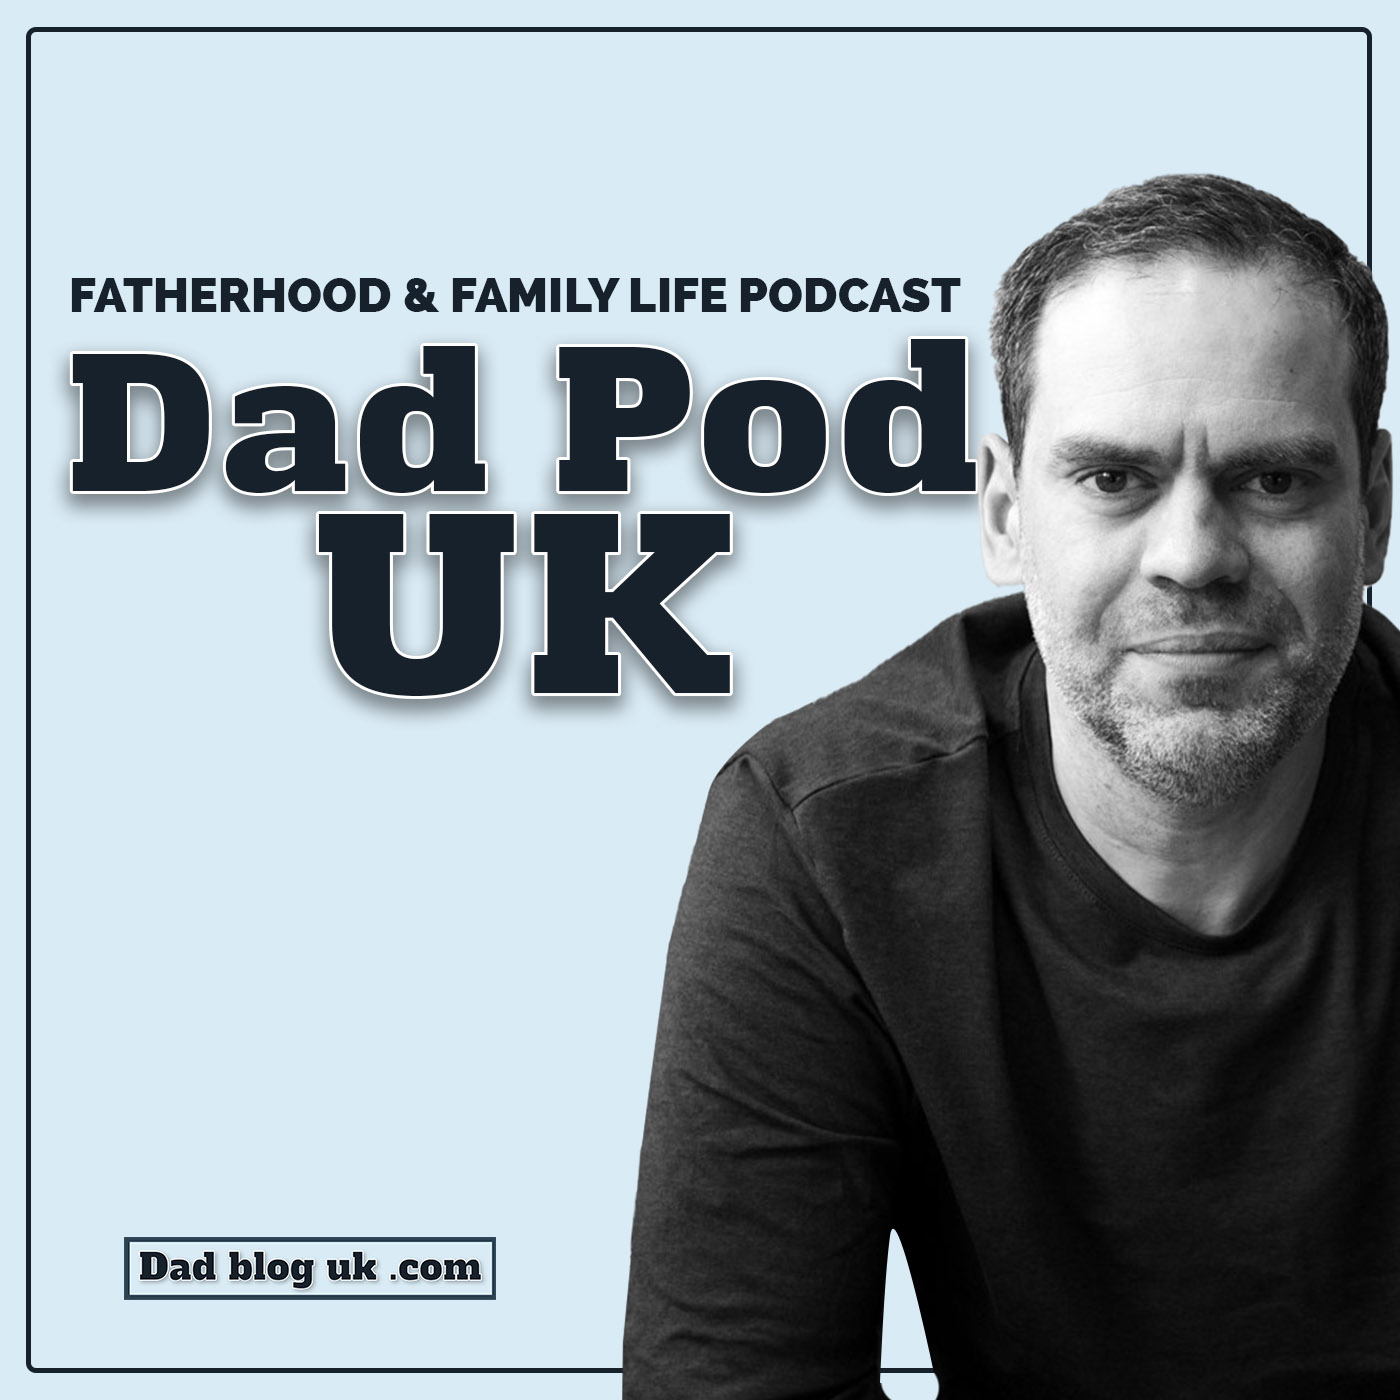 DadPodUK podcast badge. Episode 3 is an interview with criminal justice campaigner David Breakspear